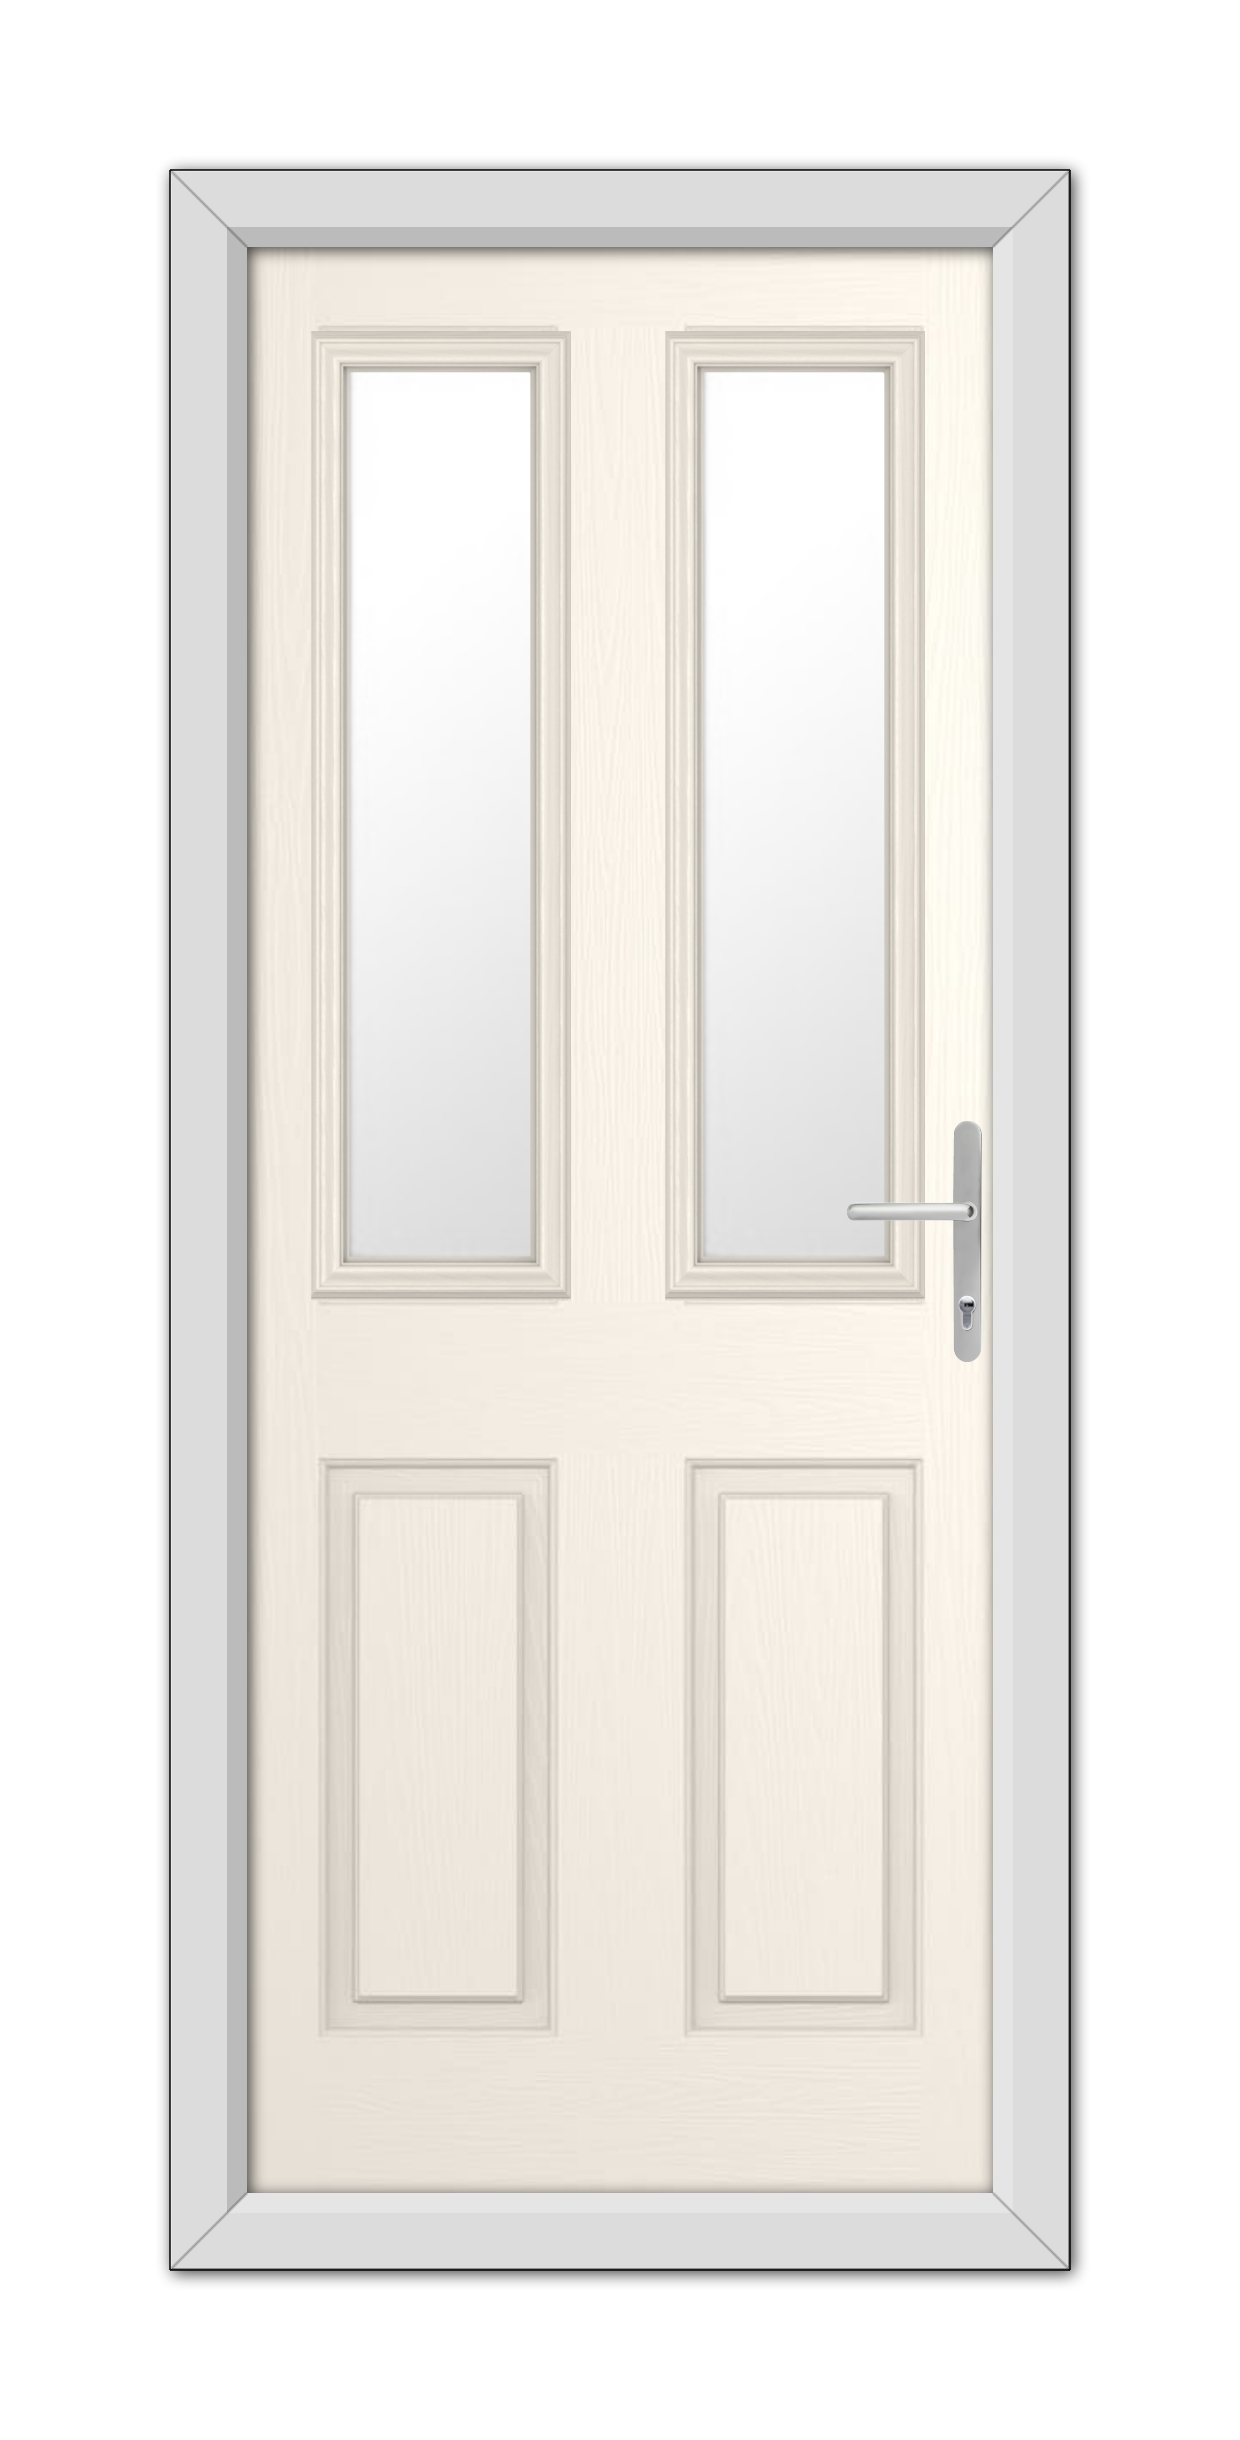 A White Foil Whitmore Composite Door 48mm Timber Core with glass panels on the top half and a metal handle on the right side, set in a gray frame.